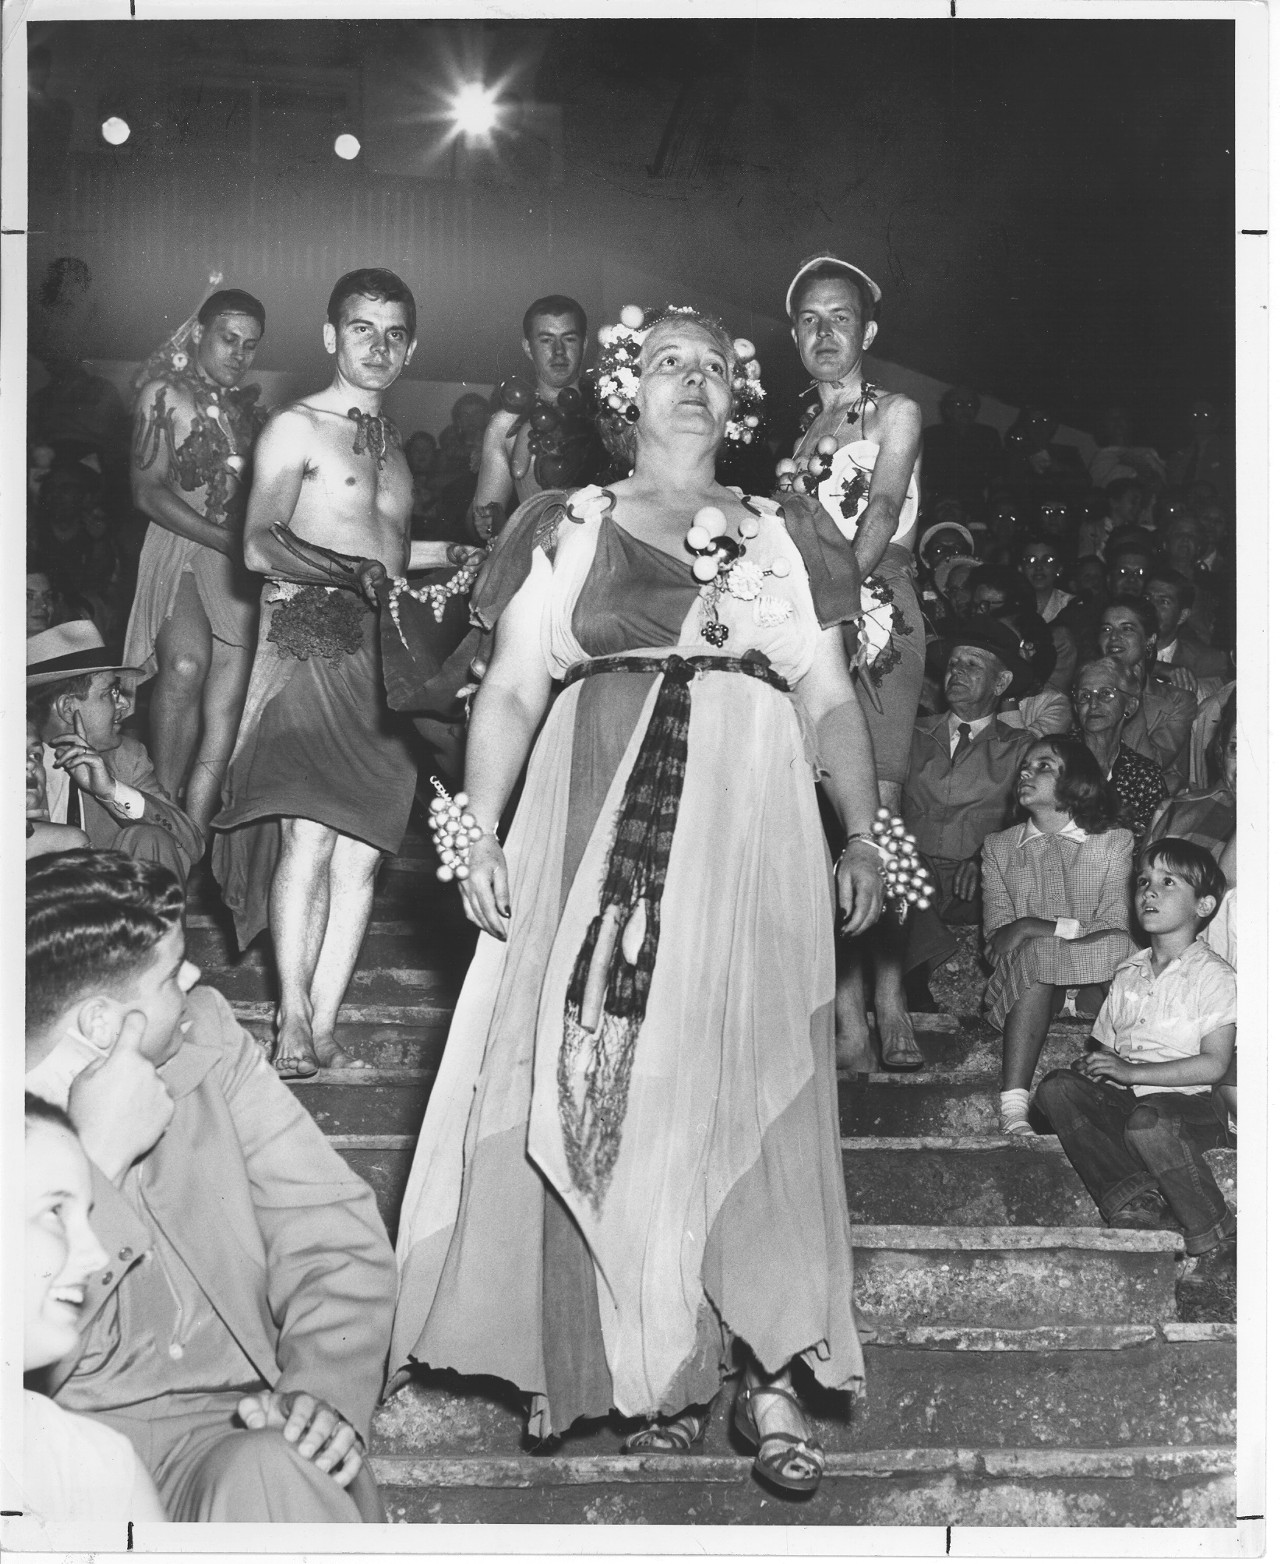 Kay Crews as Her Asthmatic Majesty, 1952